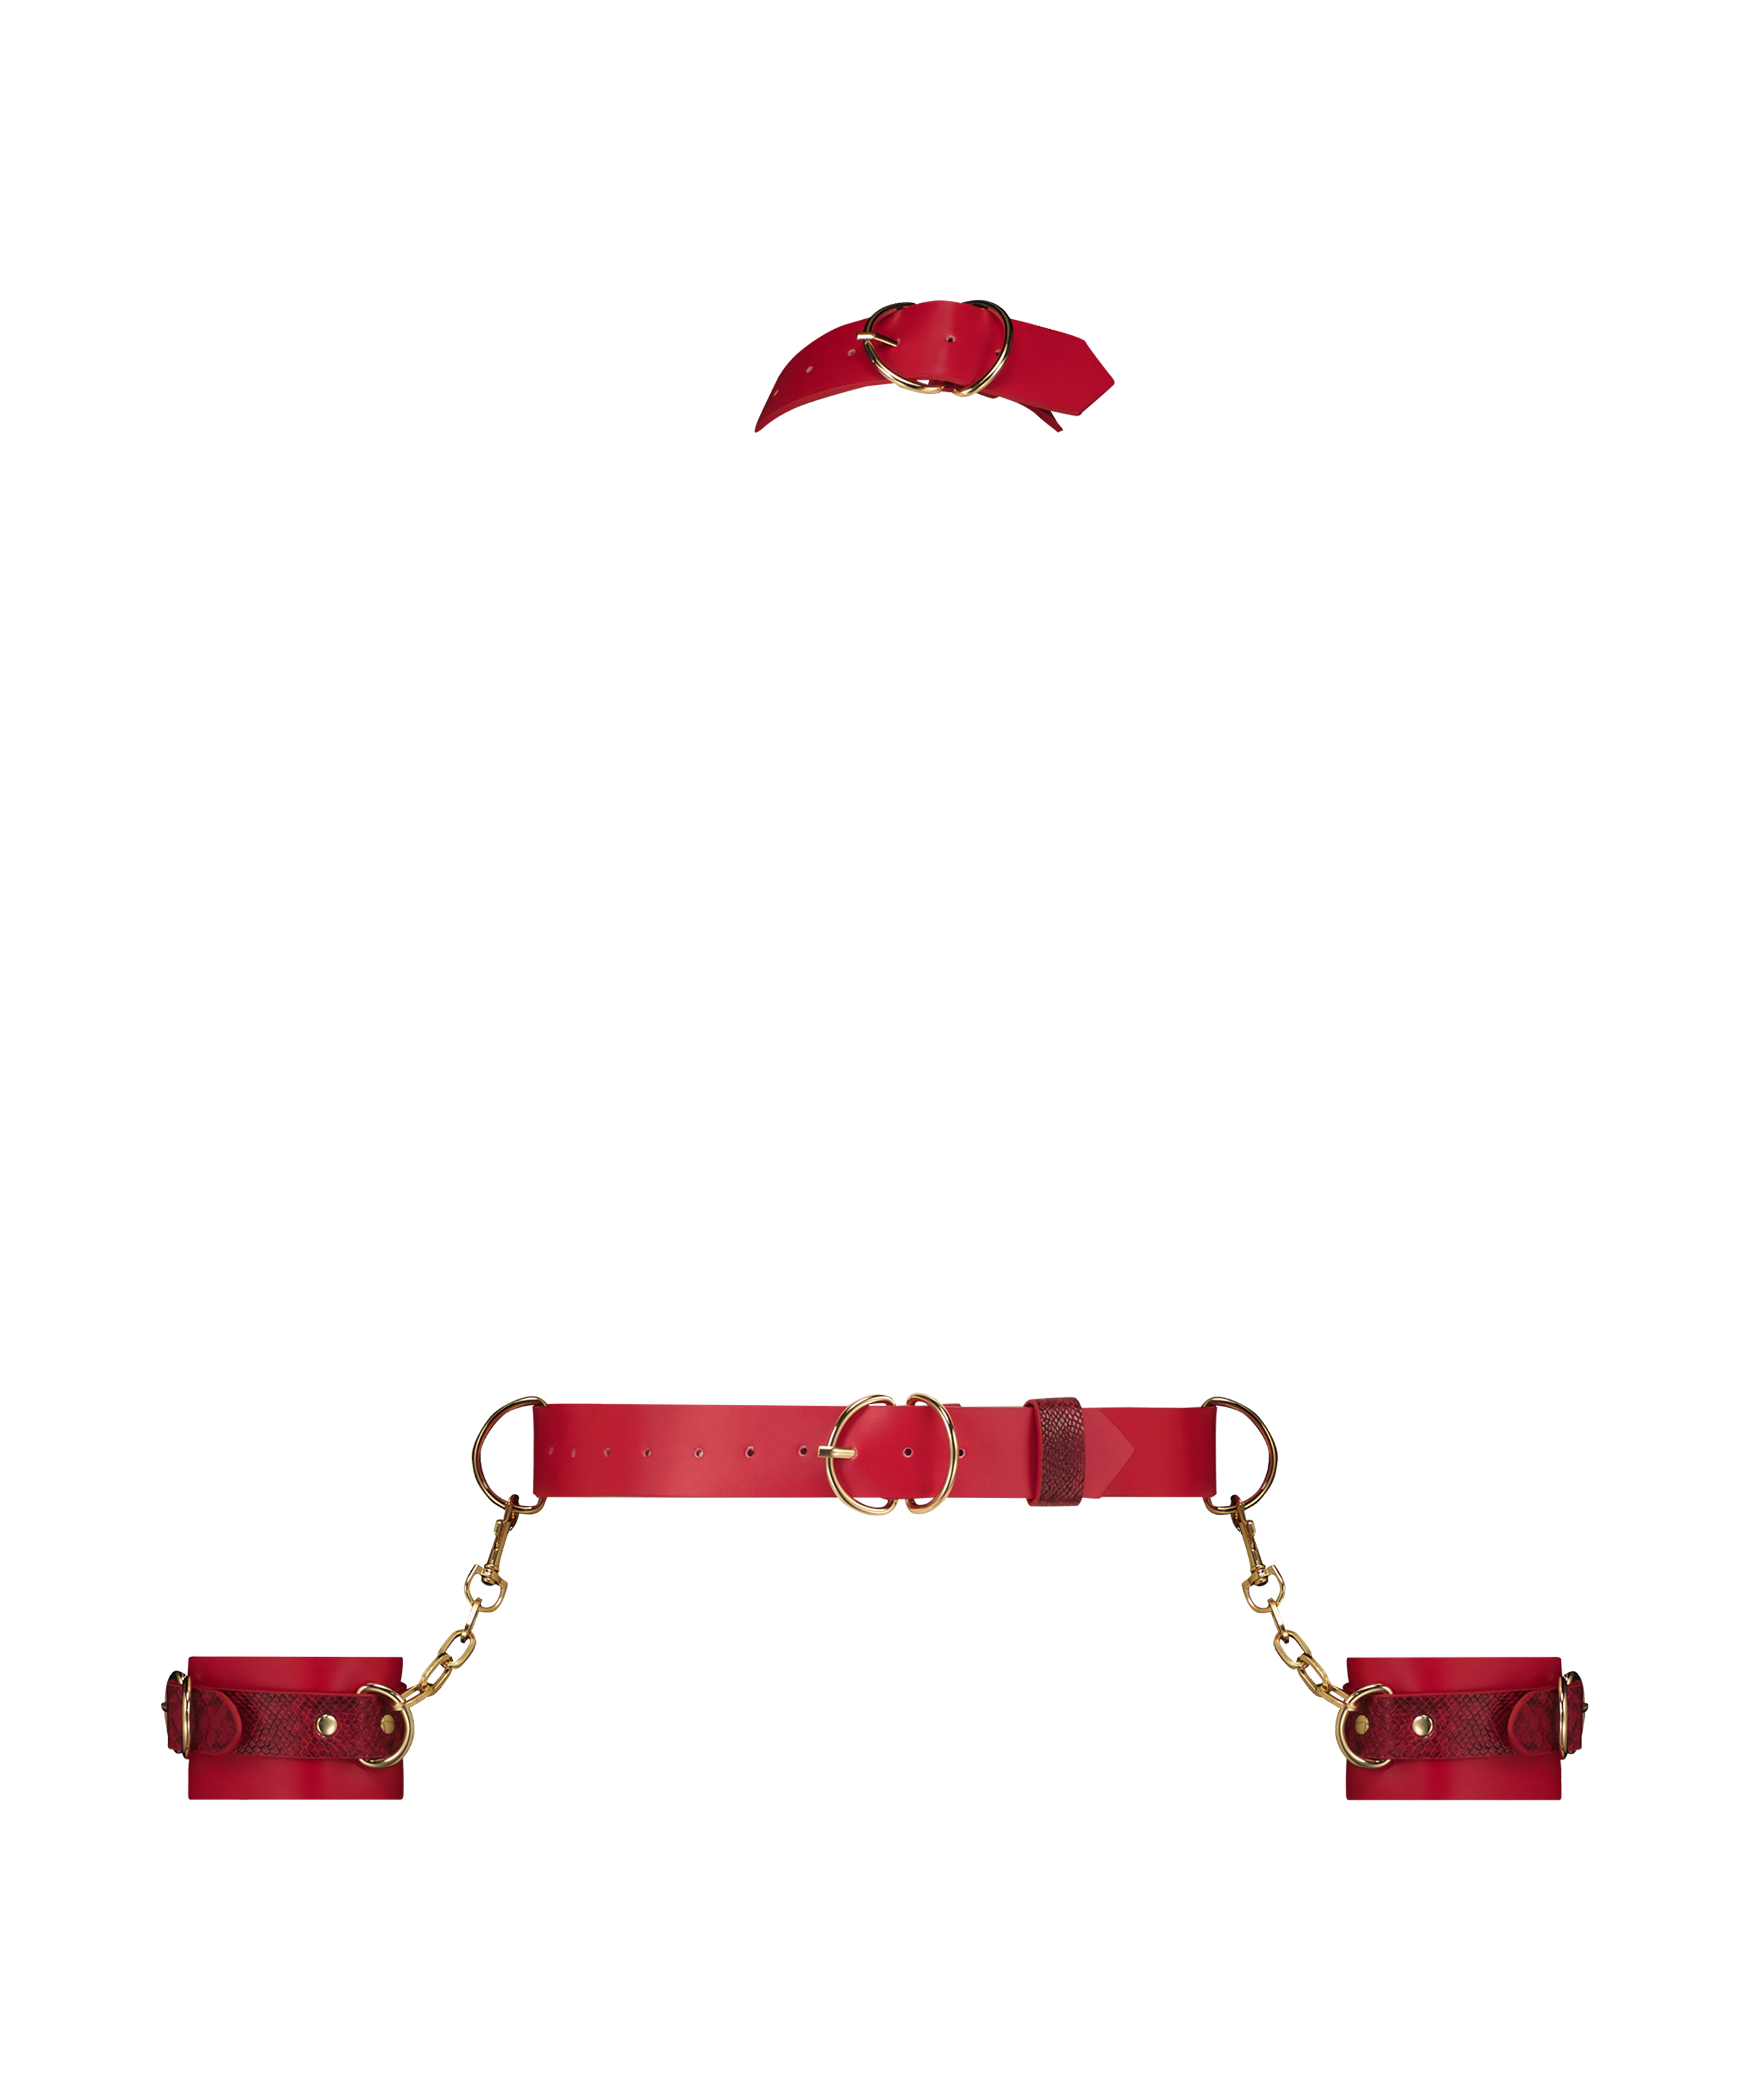 Private Snake handcuffs harness, Red, main